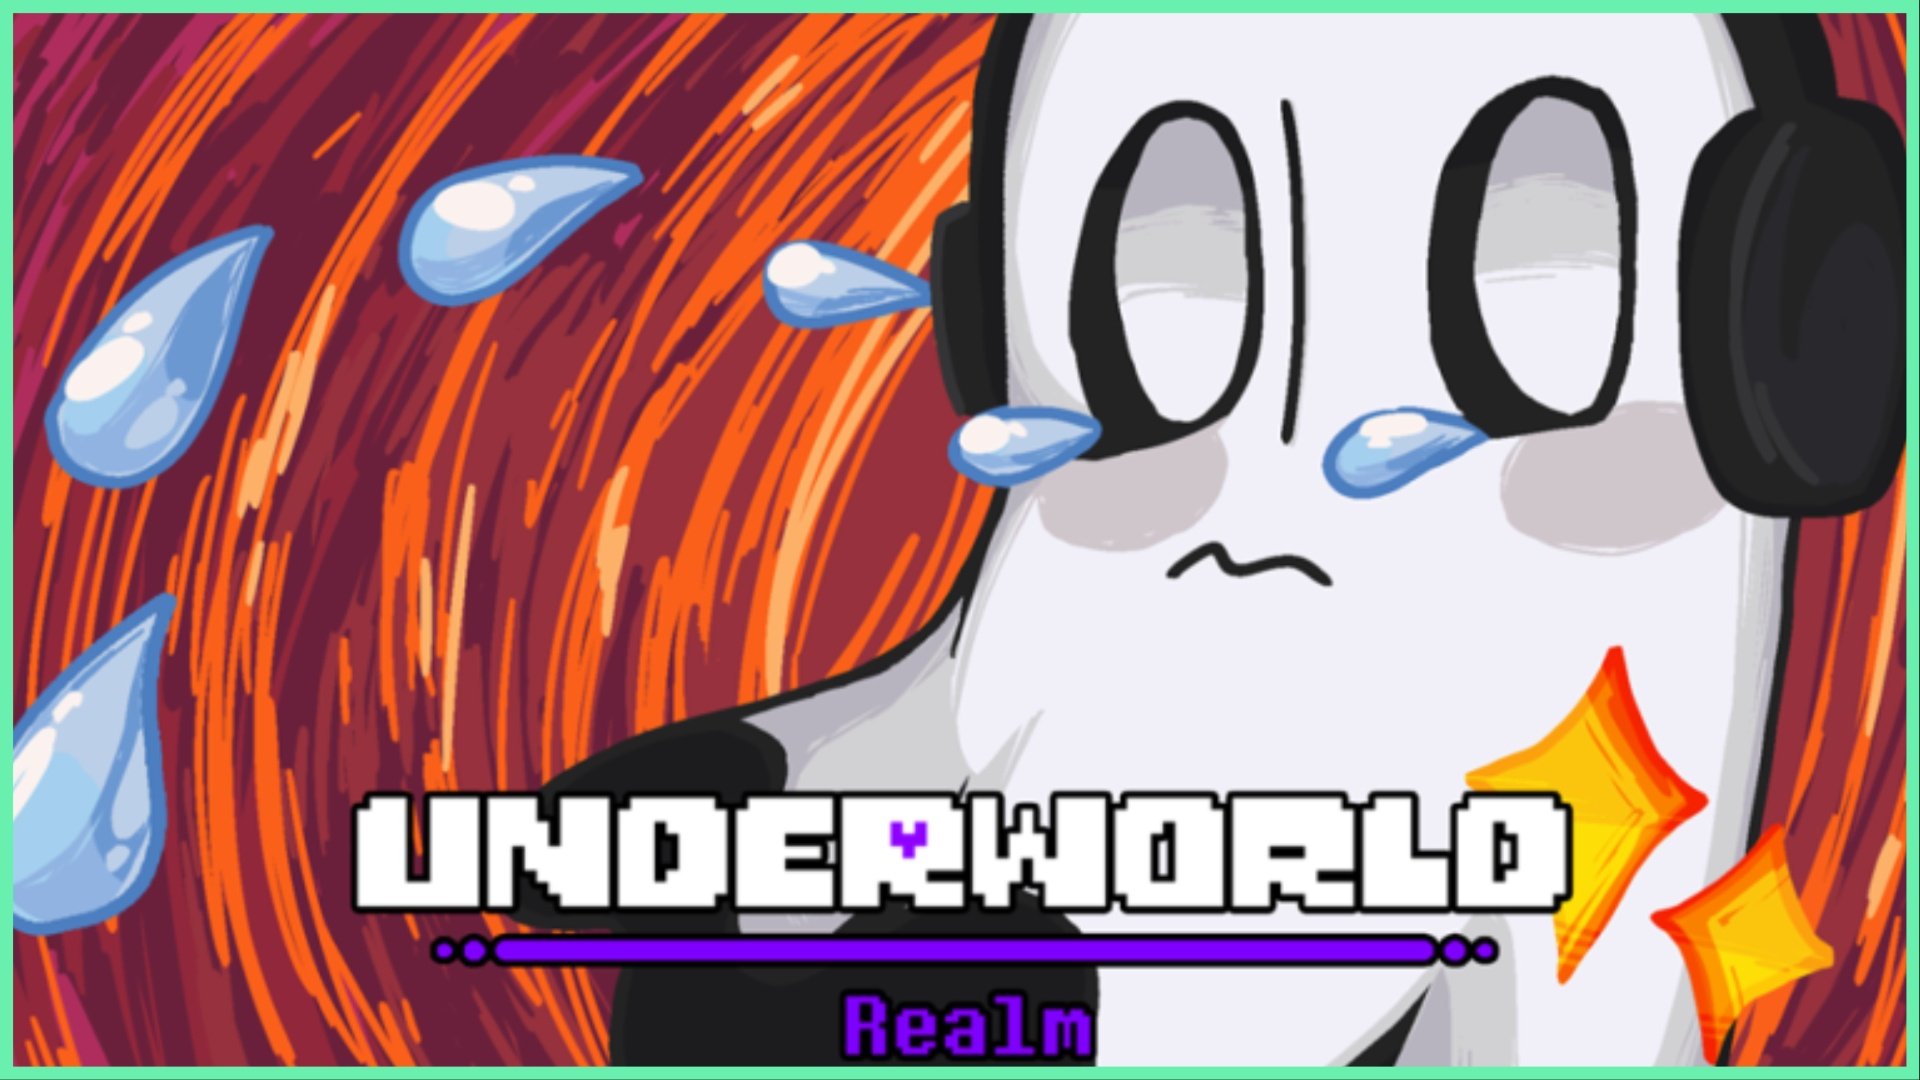 The image shows a small crying ghost with a black headset on the tears are flowing toward the viewer. The background is a circle pattern in different shades of red and orange. The game logo is written in the bottom in the undertale font